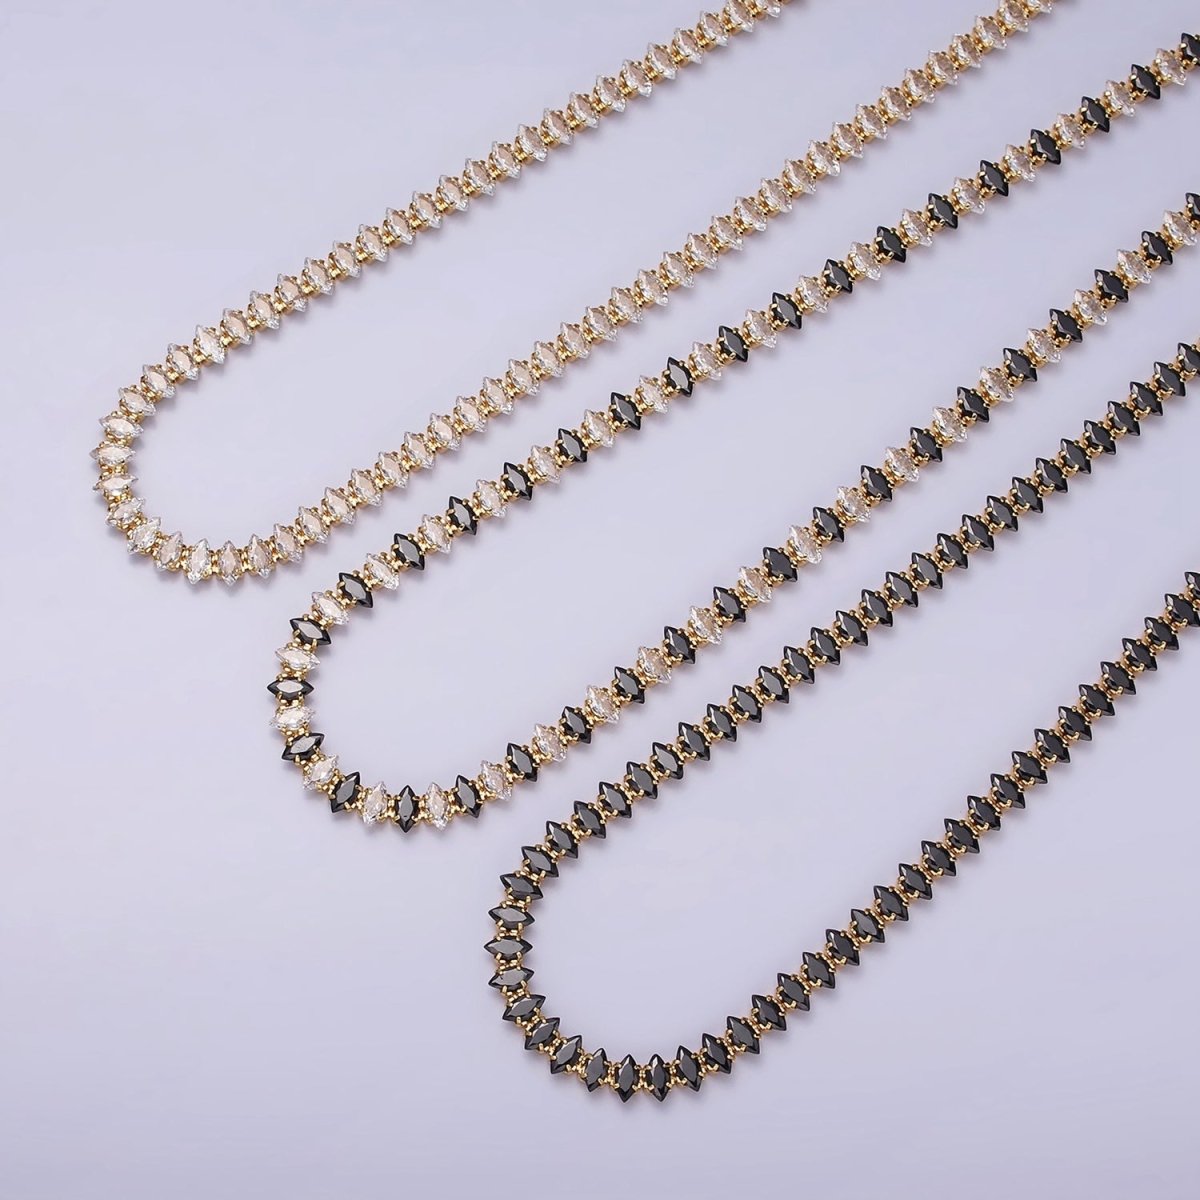 16K Gold Filled Clear, Black, Checkered 5mm Marquise CZ 17 Inch Tennis Chain Necklace | WA-1767 - WA-1769 Clearance Pricing - DLUXCA